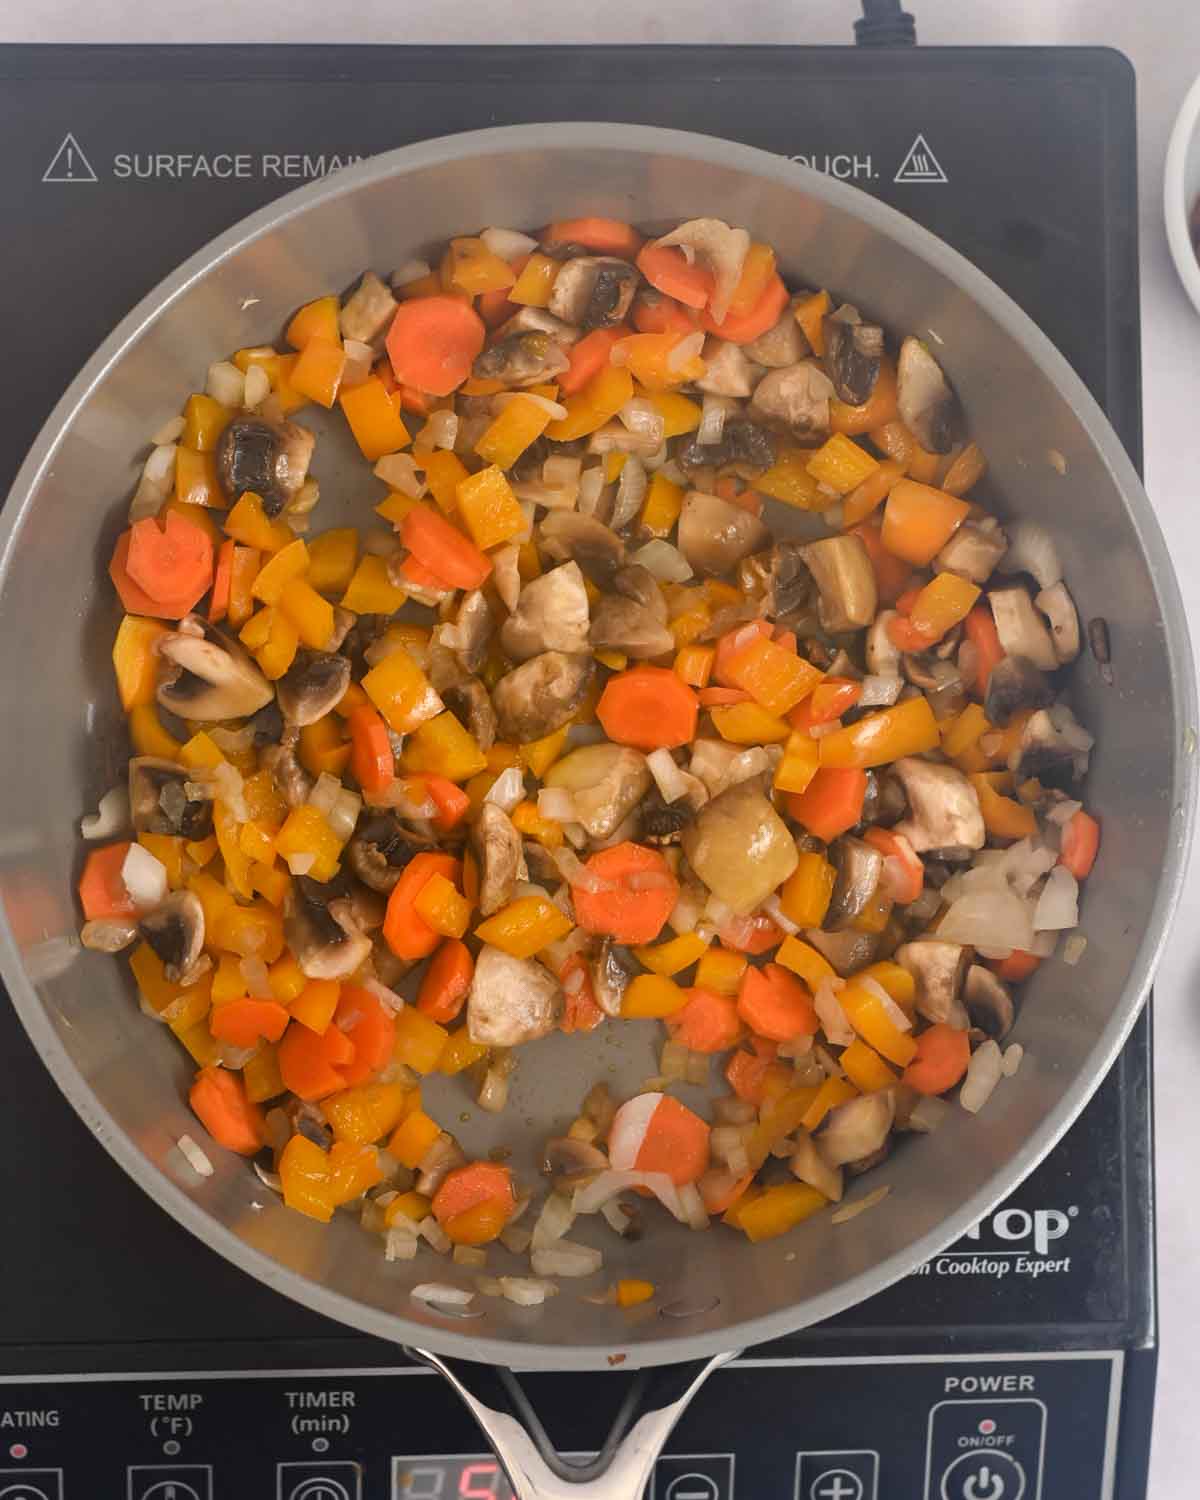 Carrots, mushrooms, onions, and peppers sauteing in a gray skillet.